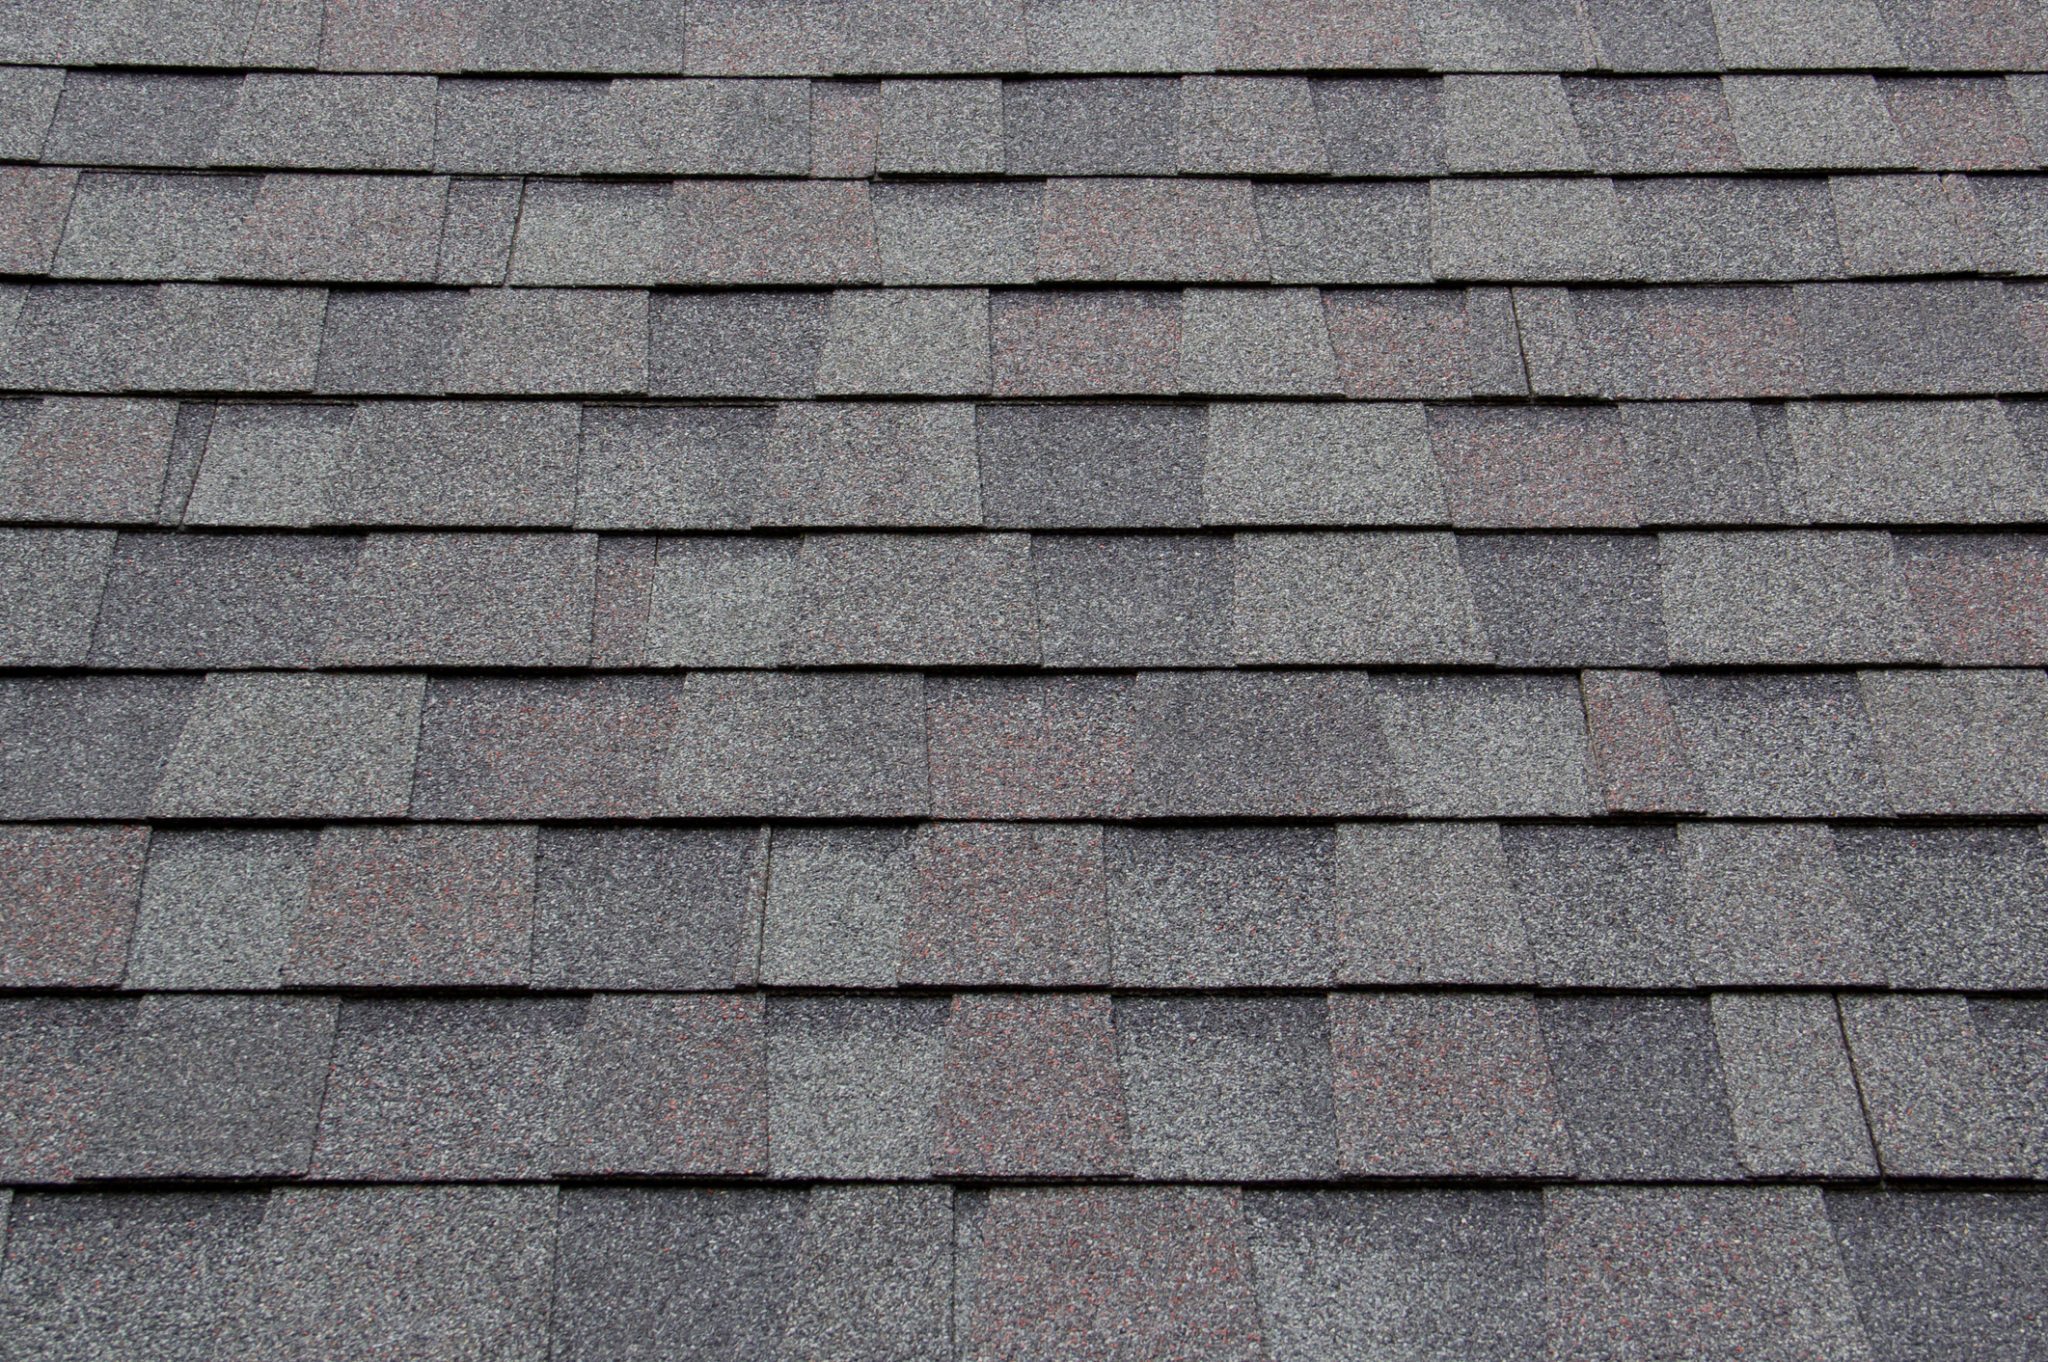 clean-roof-shingles